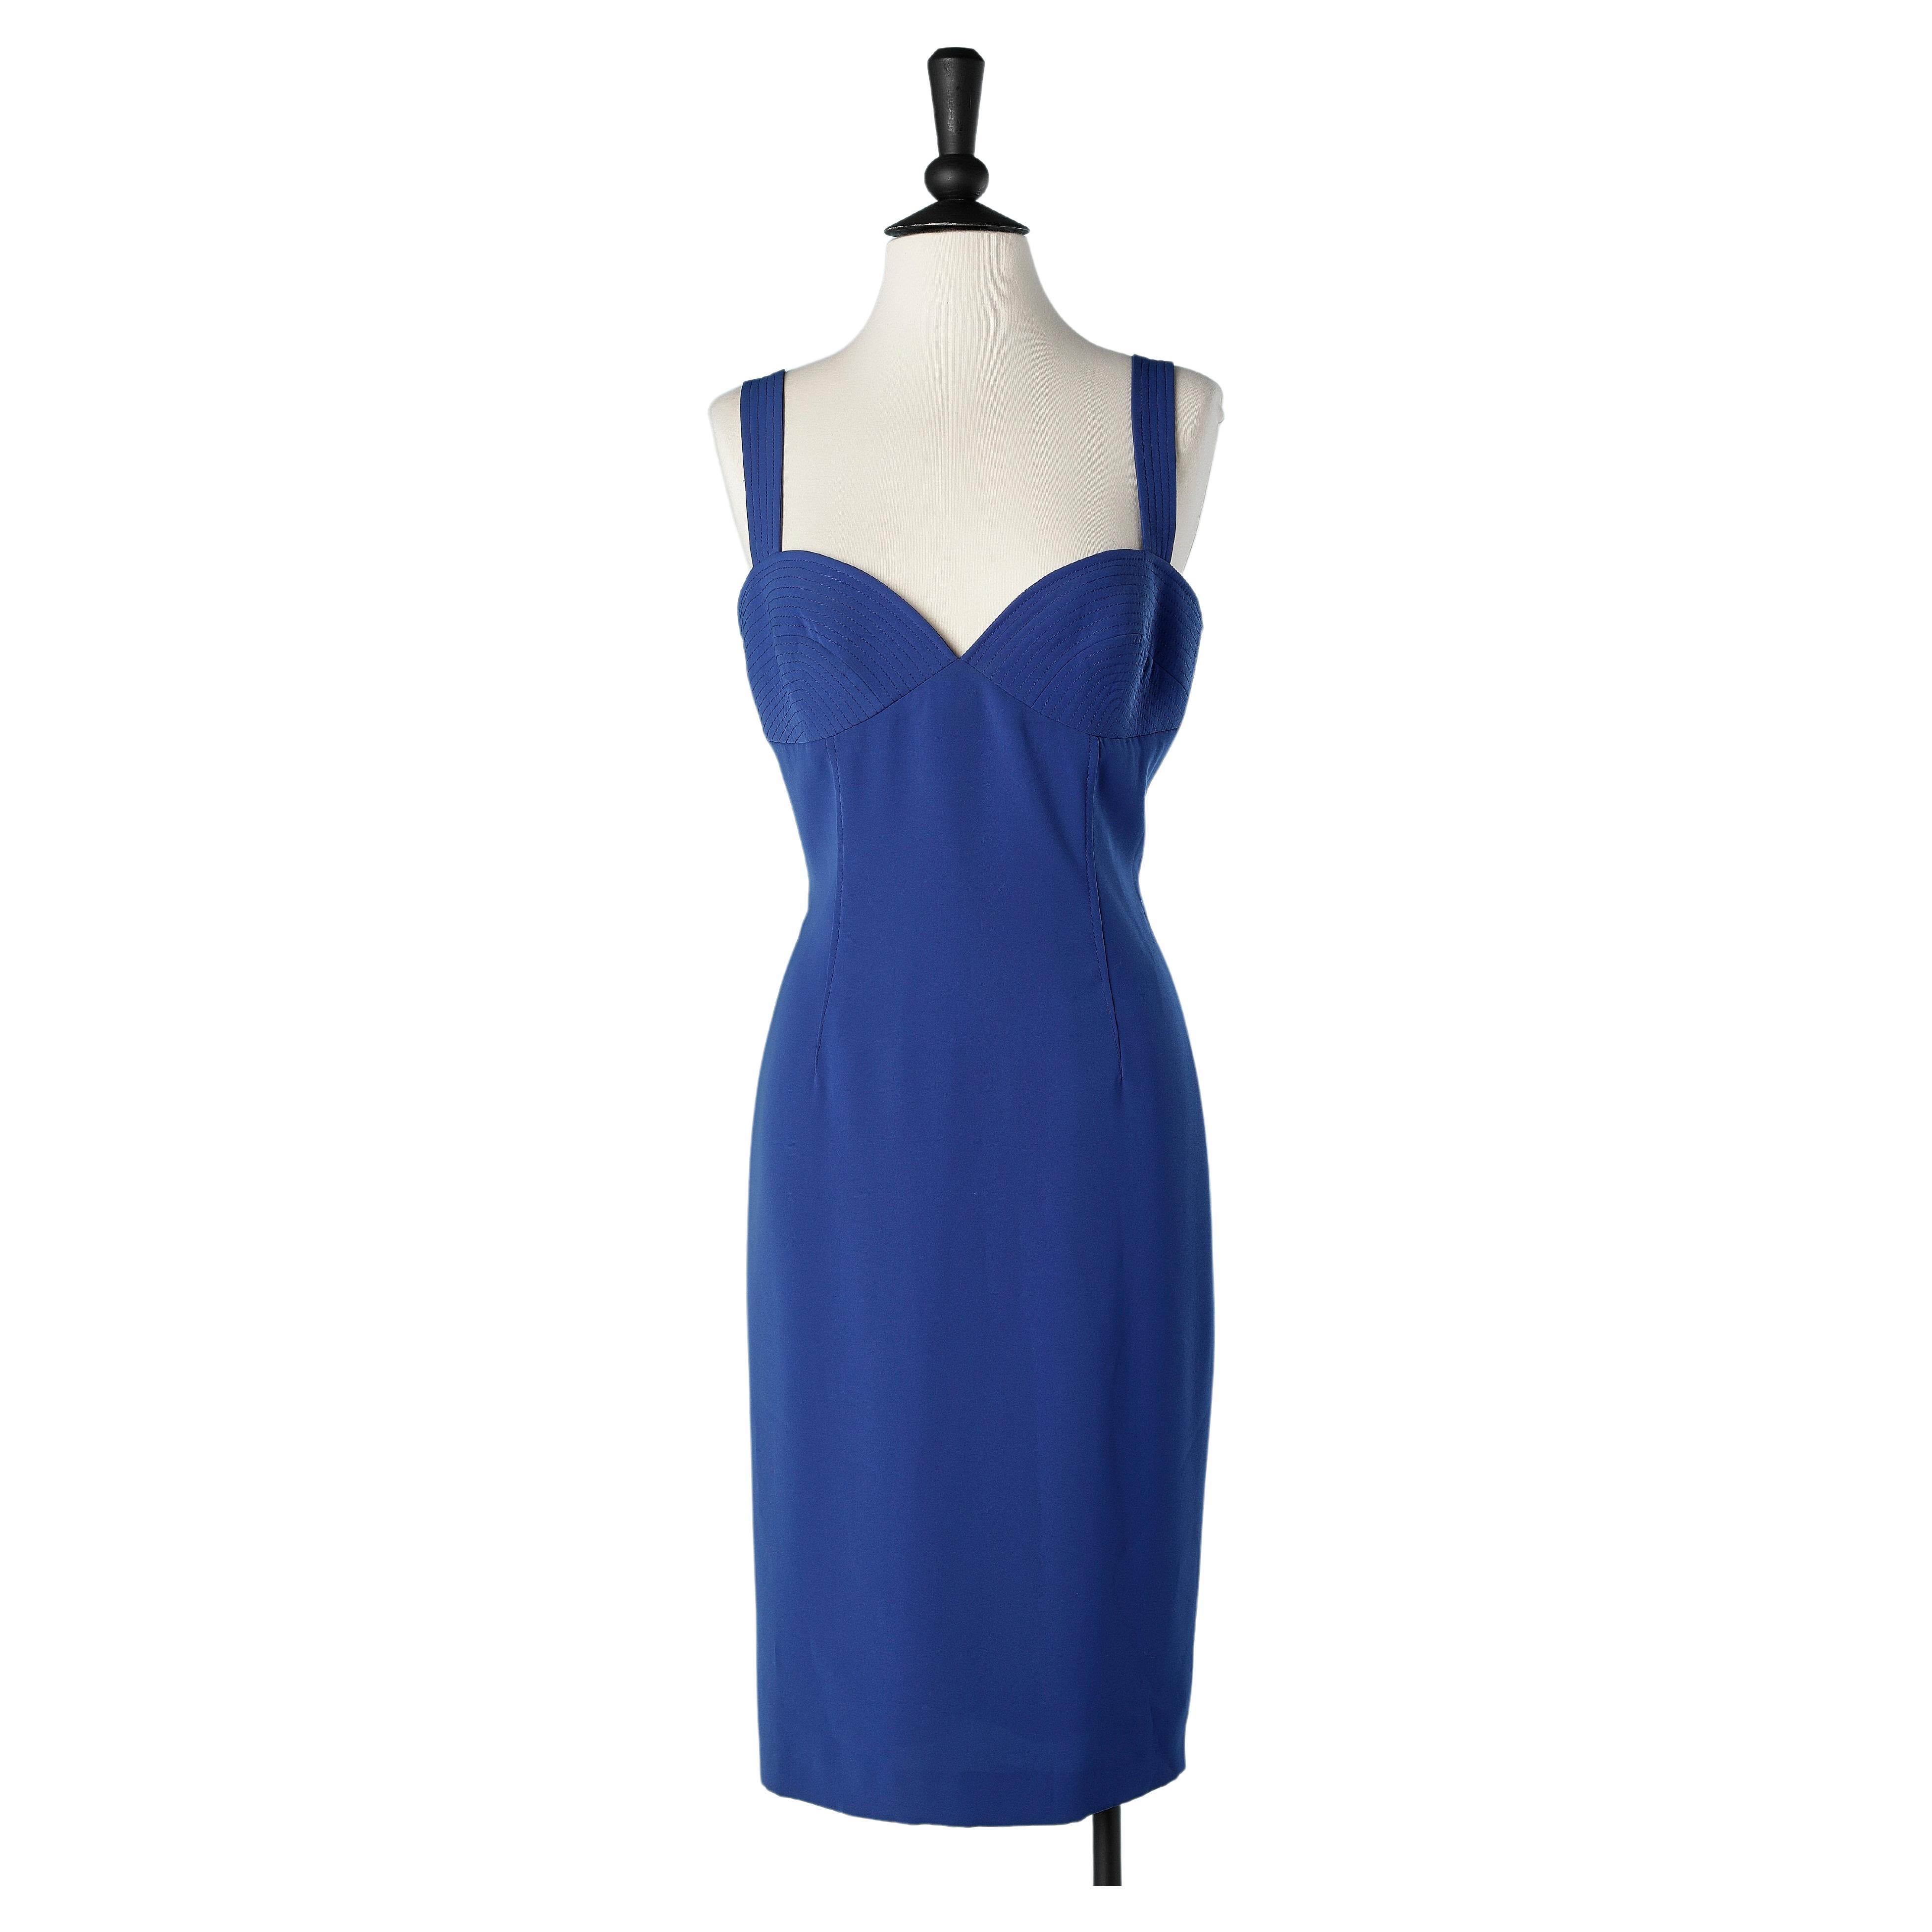 Blue cocktail dress with top-stitched bust Gianni Versace ( no brand tag)